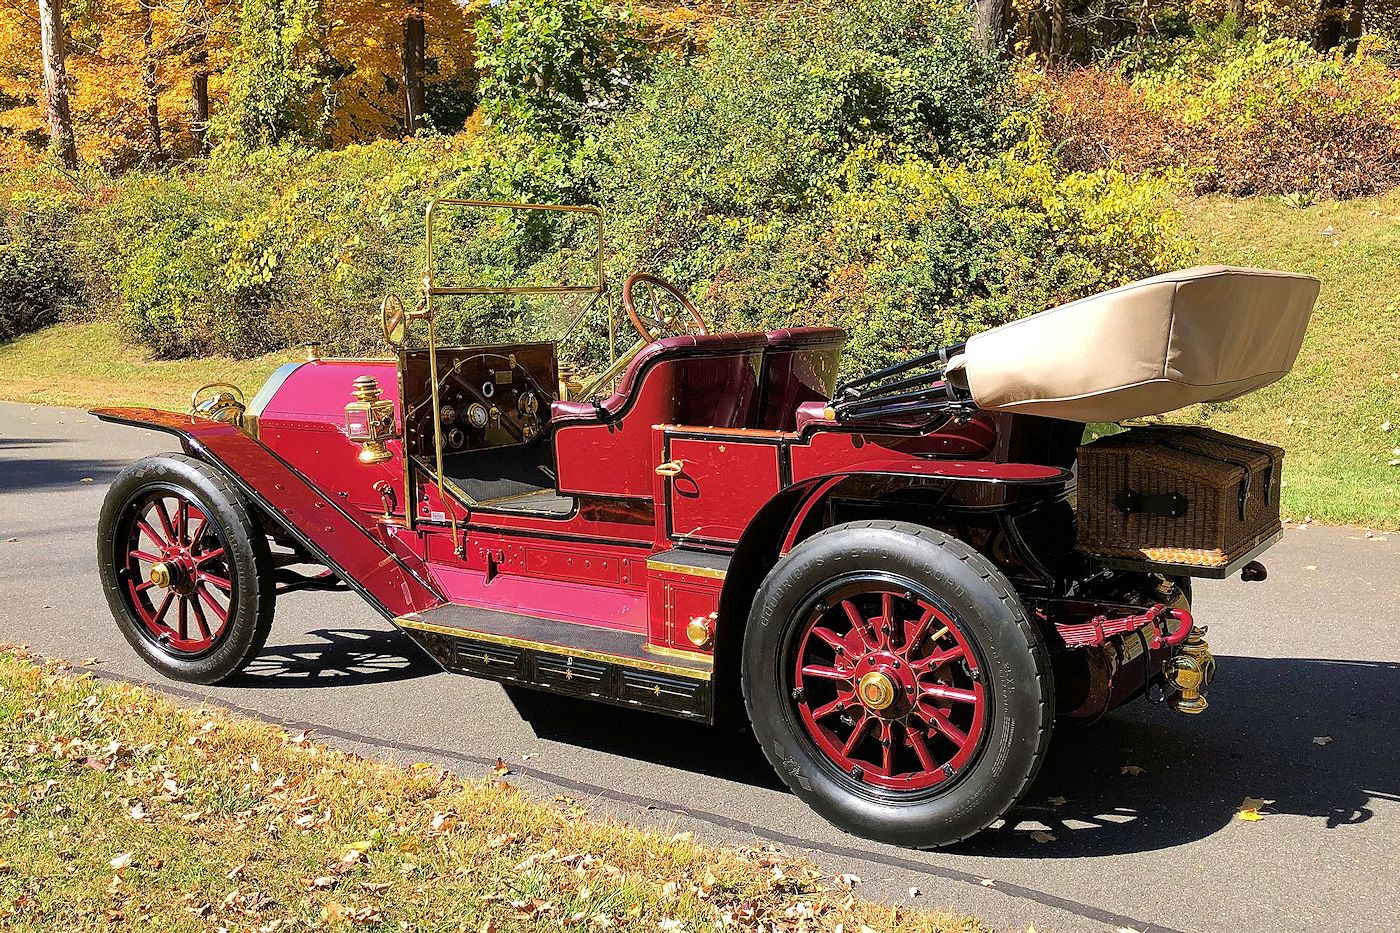 1910 Simplex Chassis #50-10351